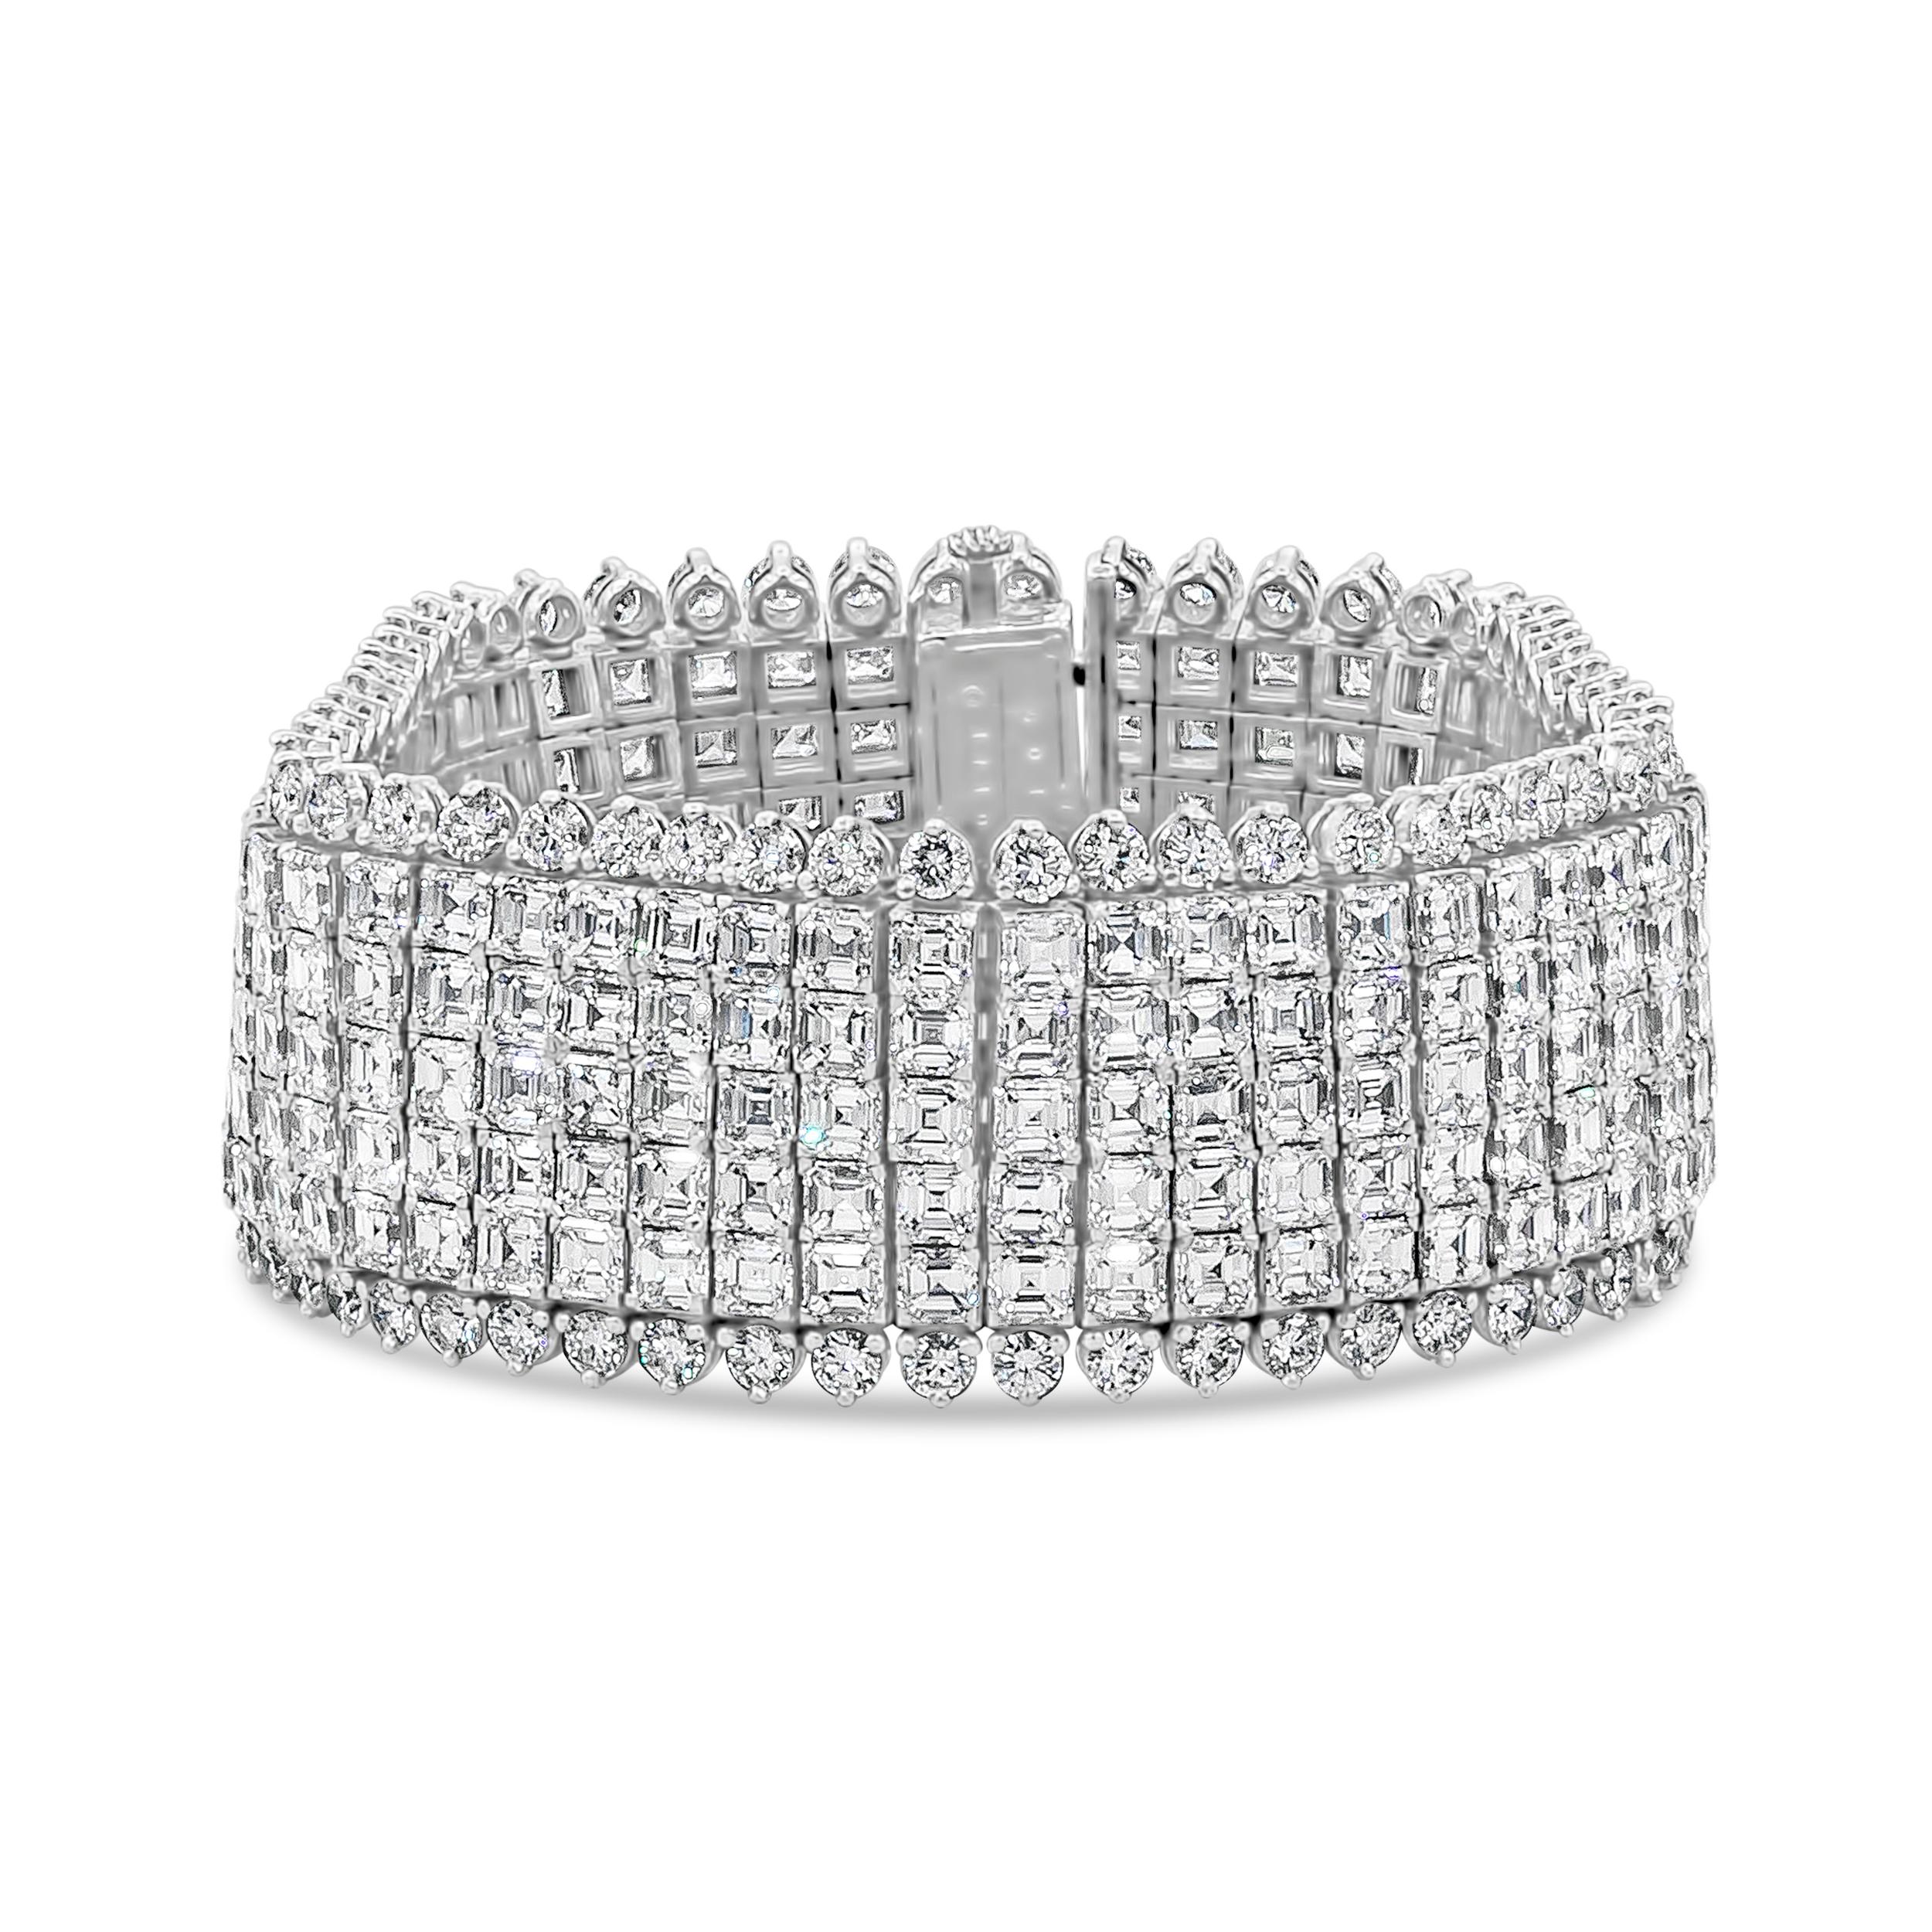 A finely crafted bracelet by Oscar Heyman, showcasing five rows of 265 pieces of Asscher cut diamonds weighing 45.25 carats total with F color and VS clarity. It is accented by a row of 106 round brilliant cut diamonds on either side weighing 6.63